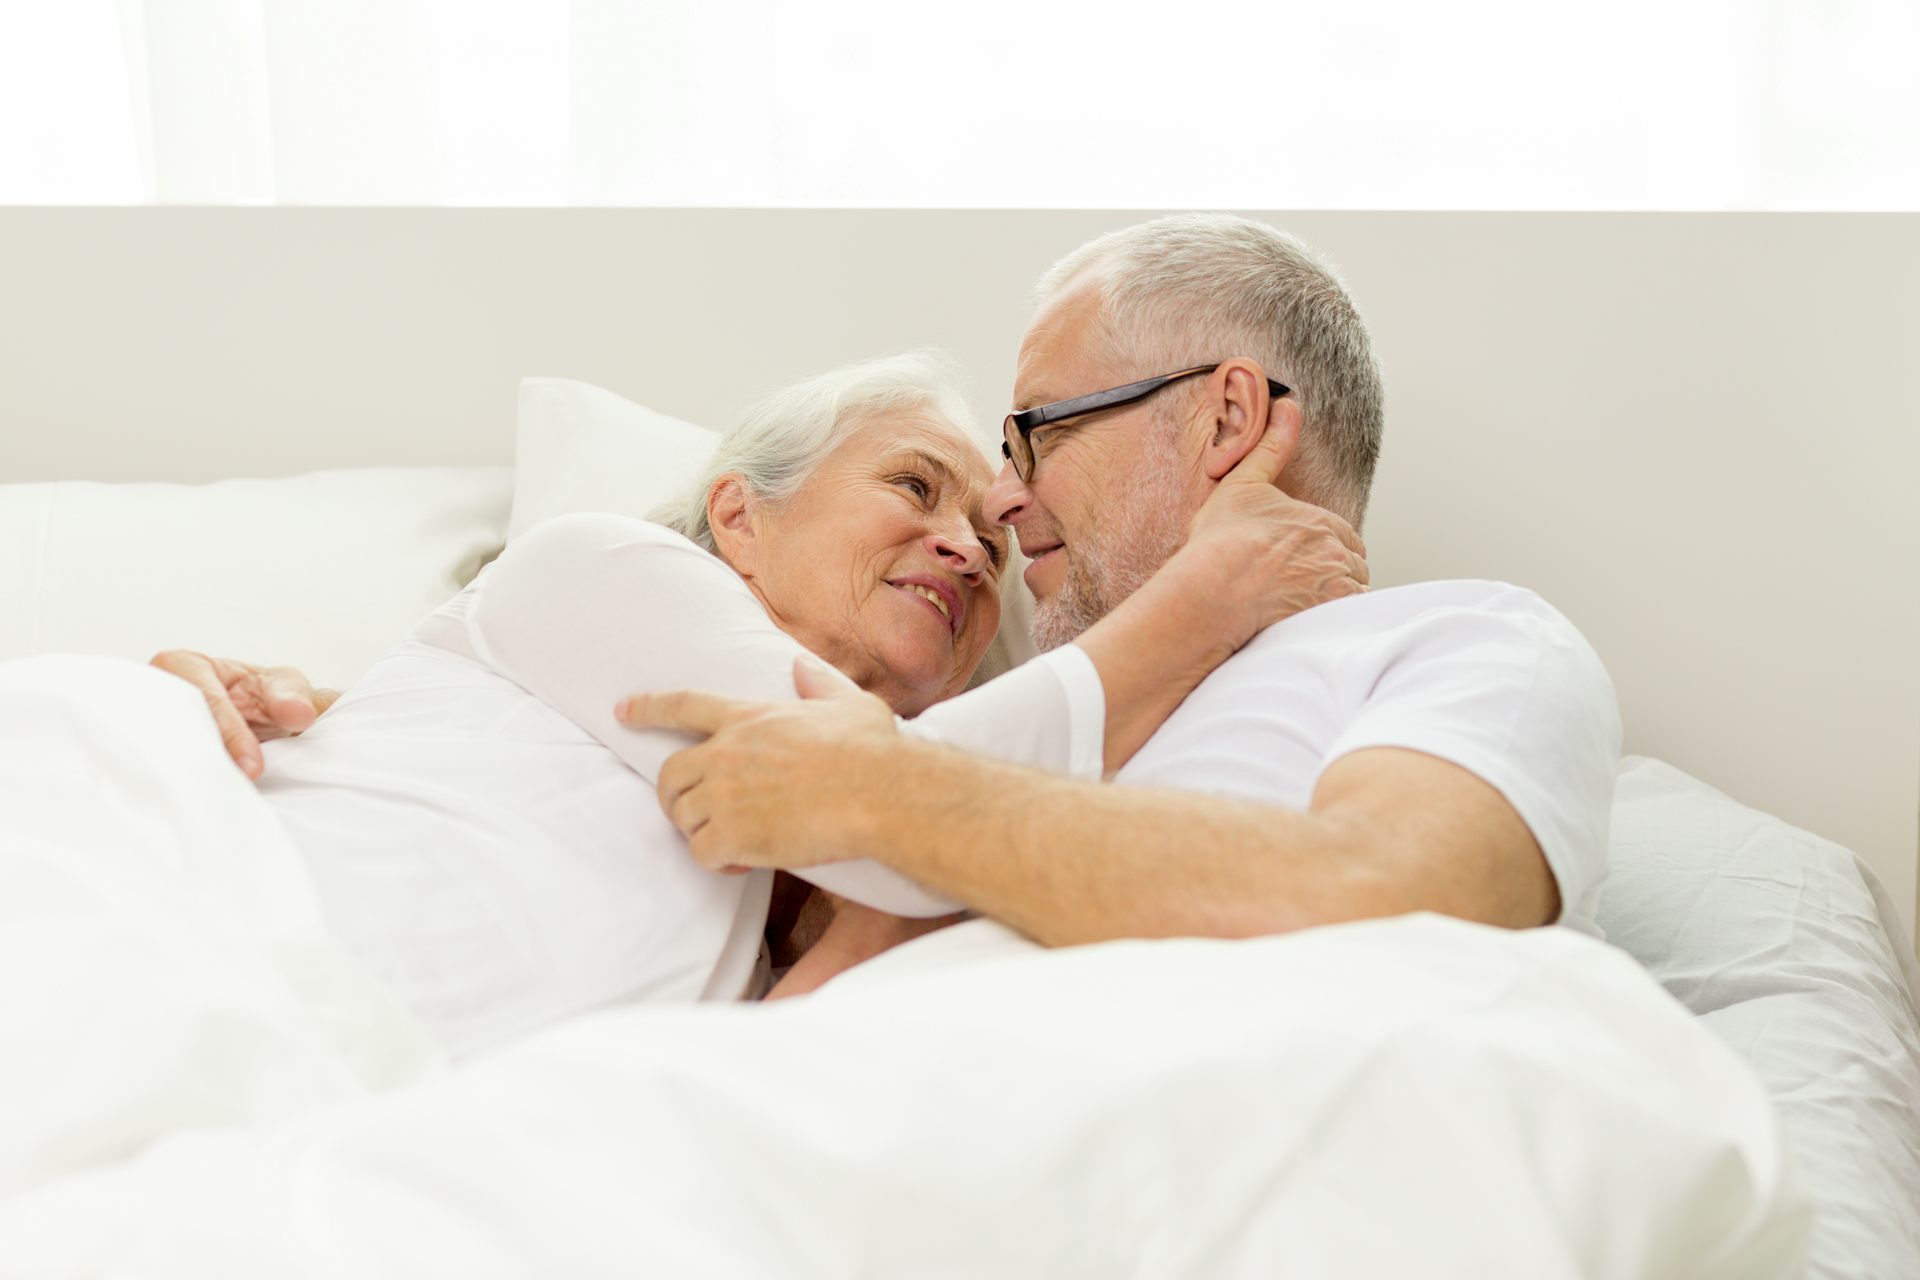 The secret sex lives of older people that can make us rethink our idea of intimacy pic